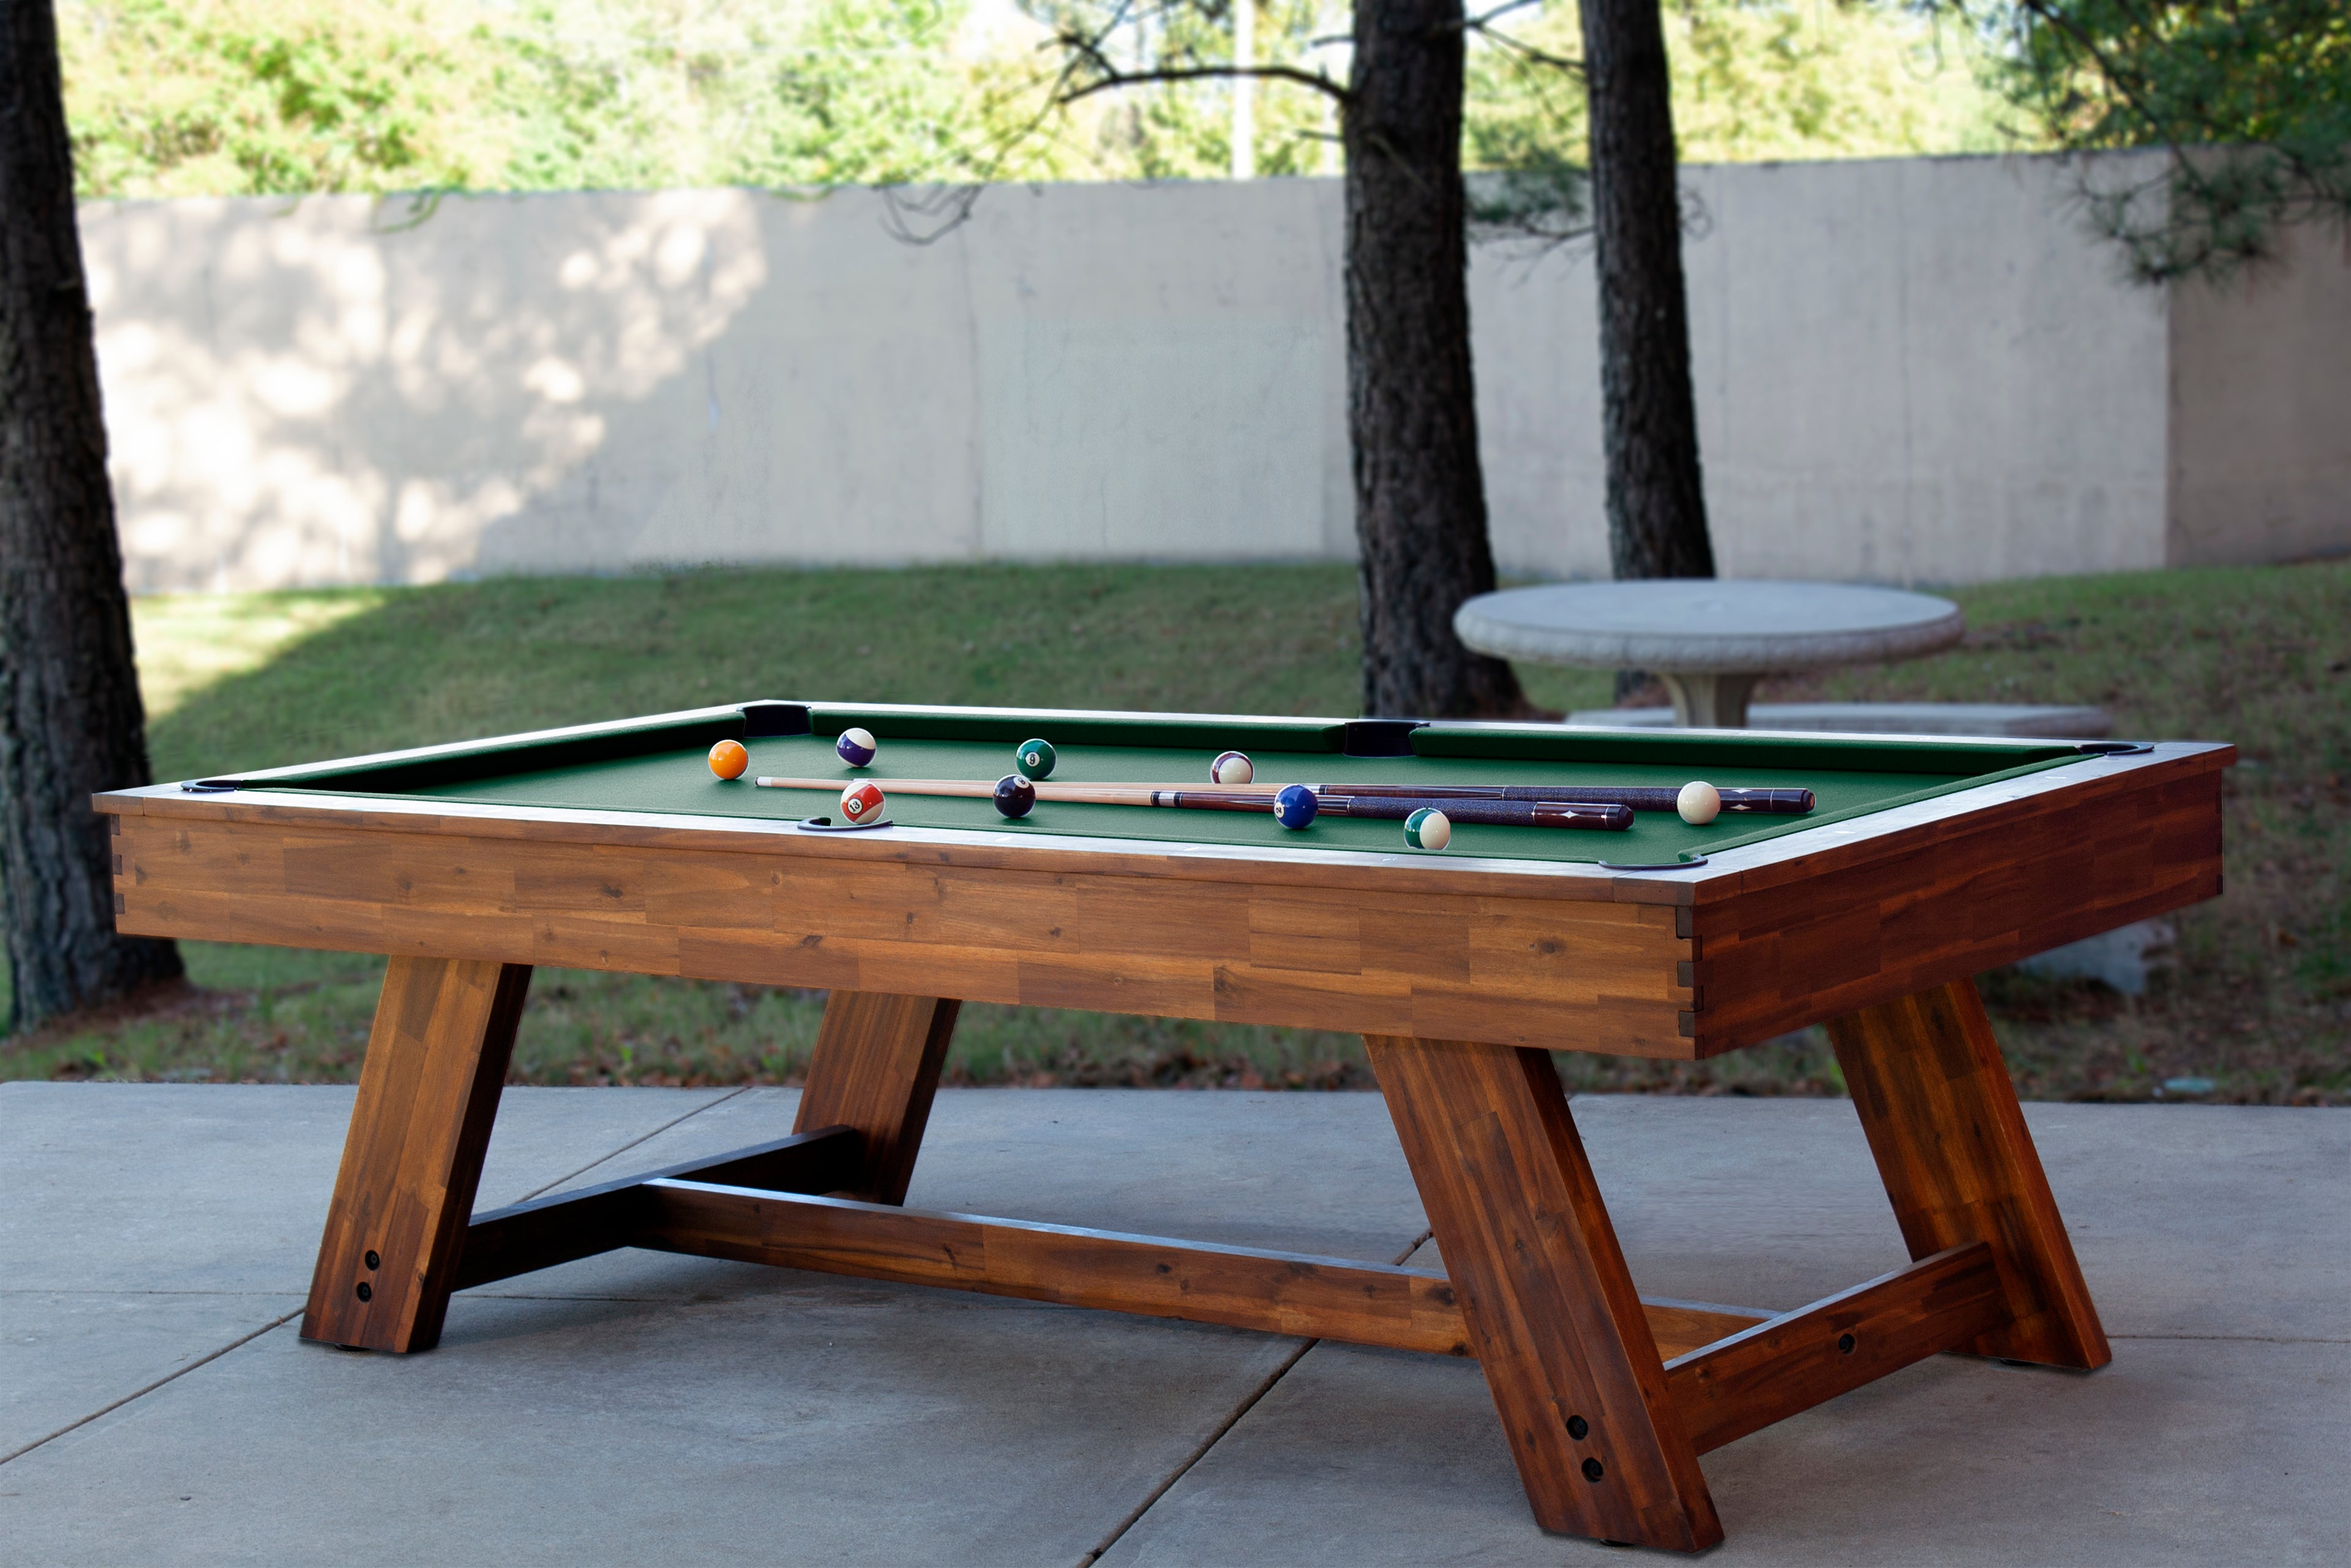 Legacy Billiards 7 Ft Barren Outdoor Pool Table in Natural Acacia Finish Outdoor Setting with Pool Balls and Cues on the Table